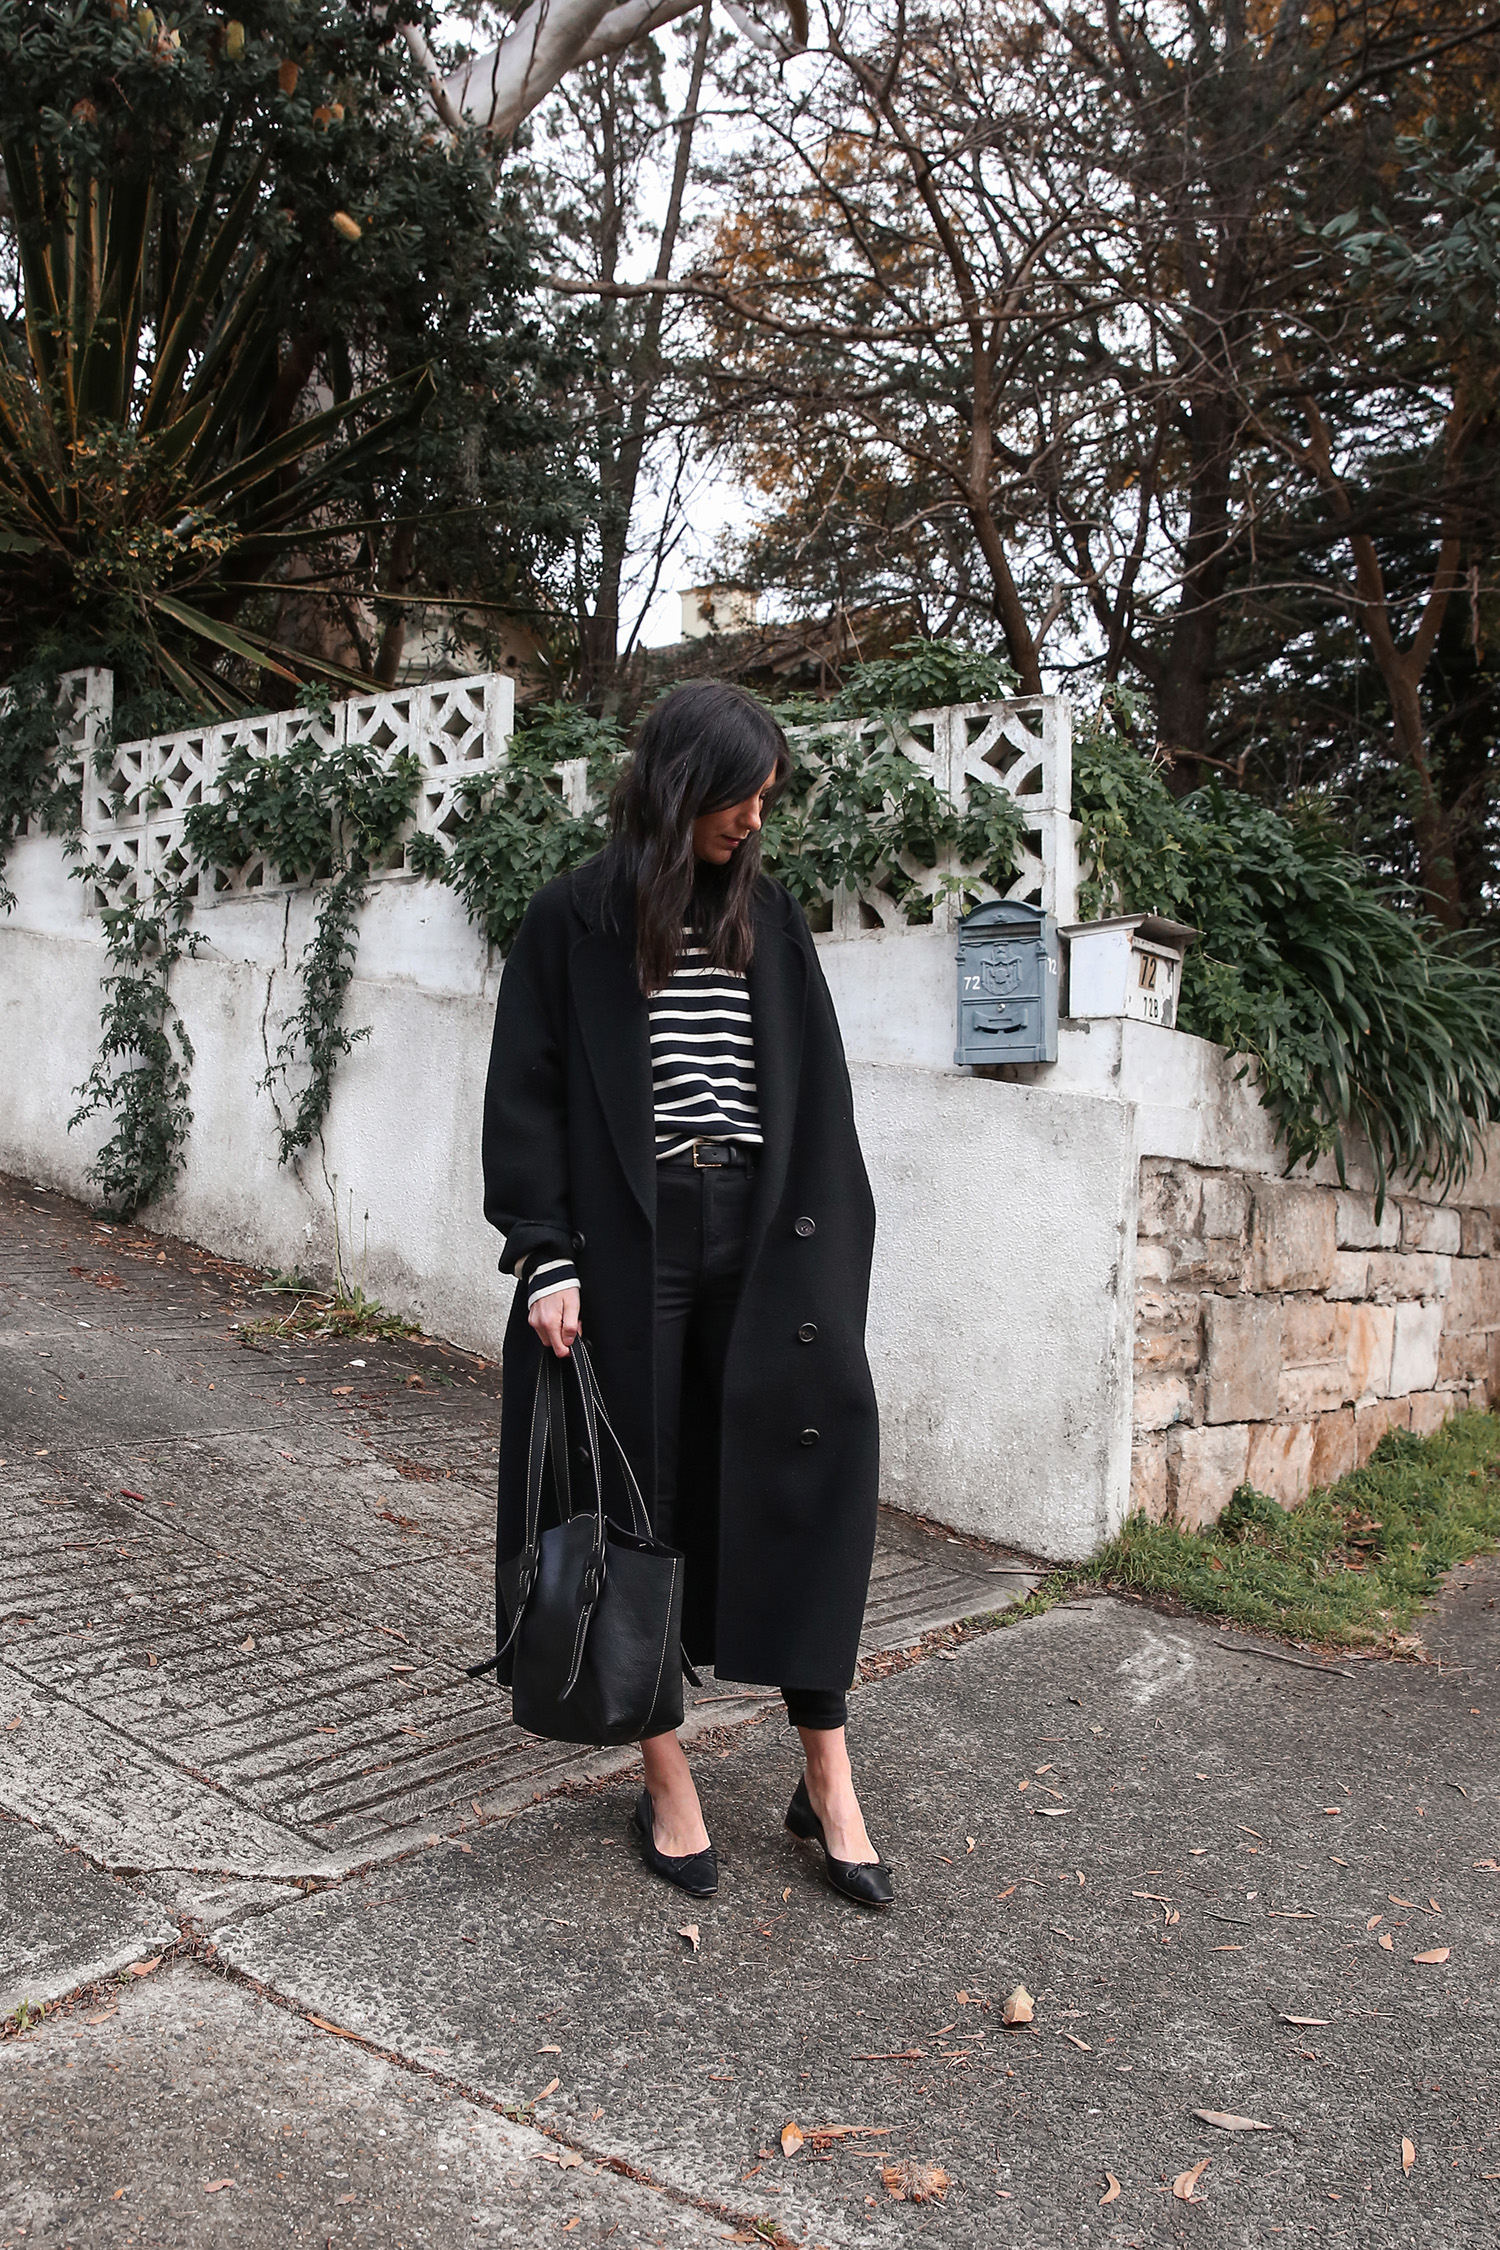 Mansur Gavriel wool coat and Reformation high and skinny jeans